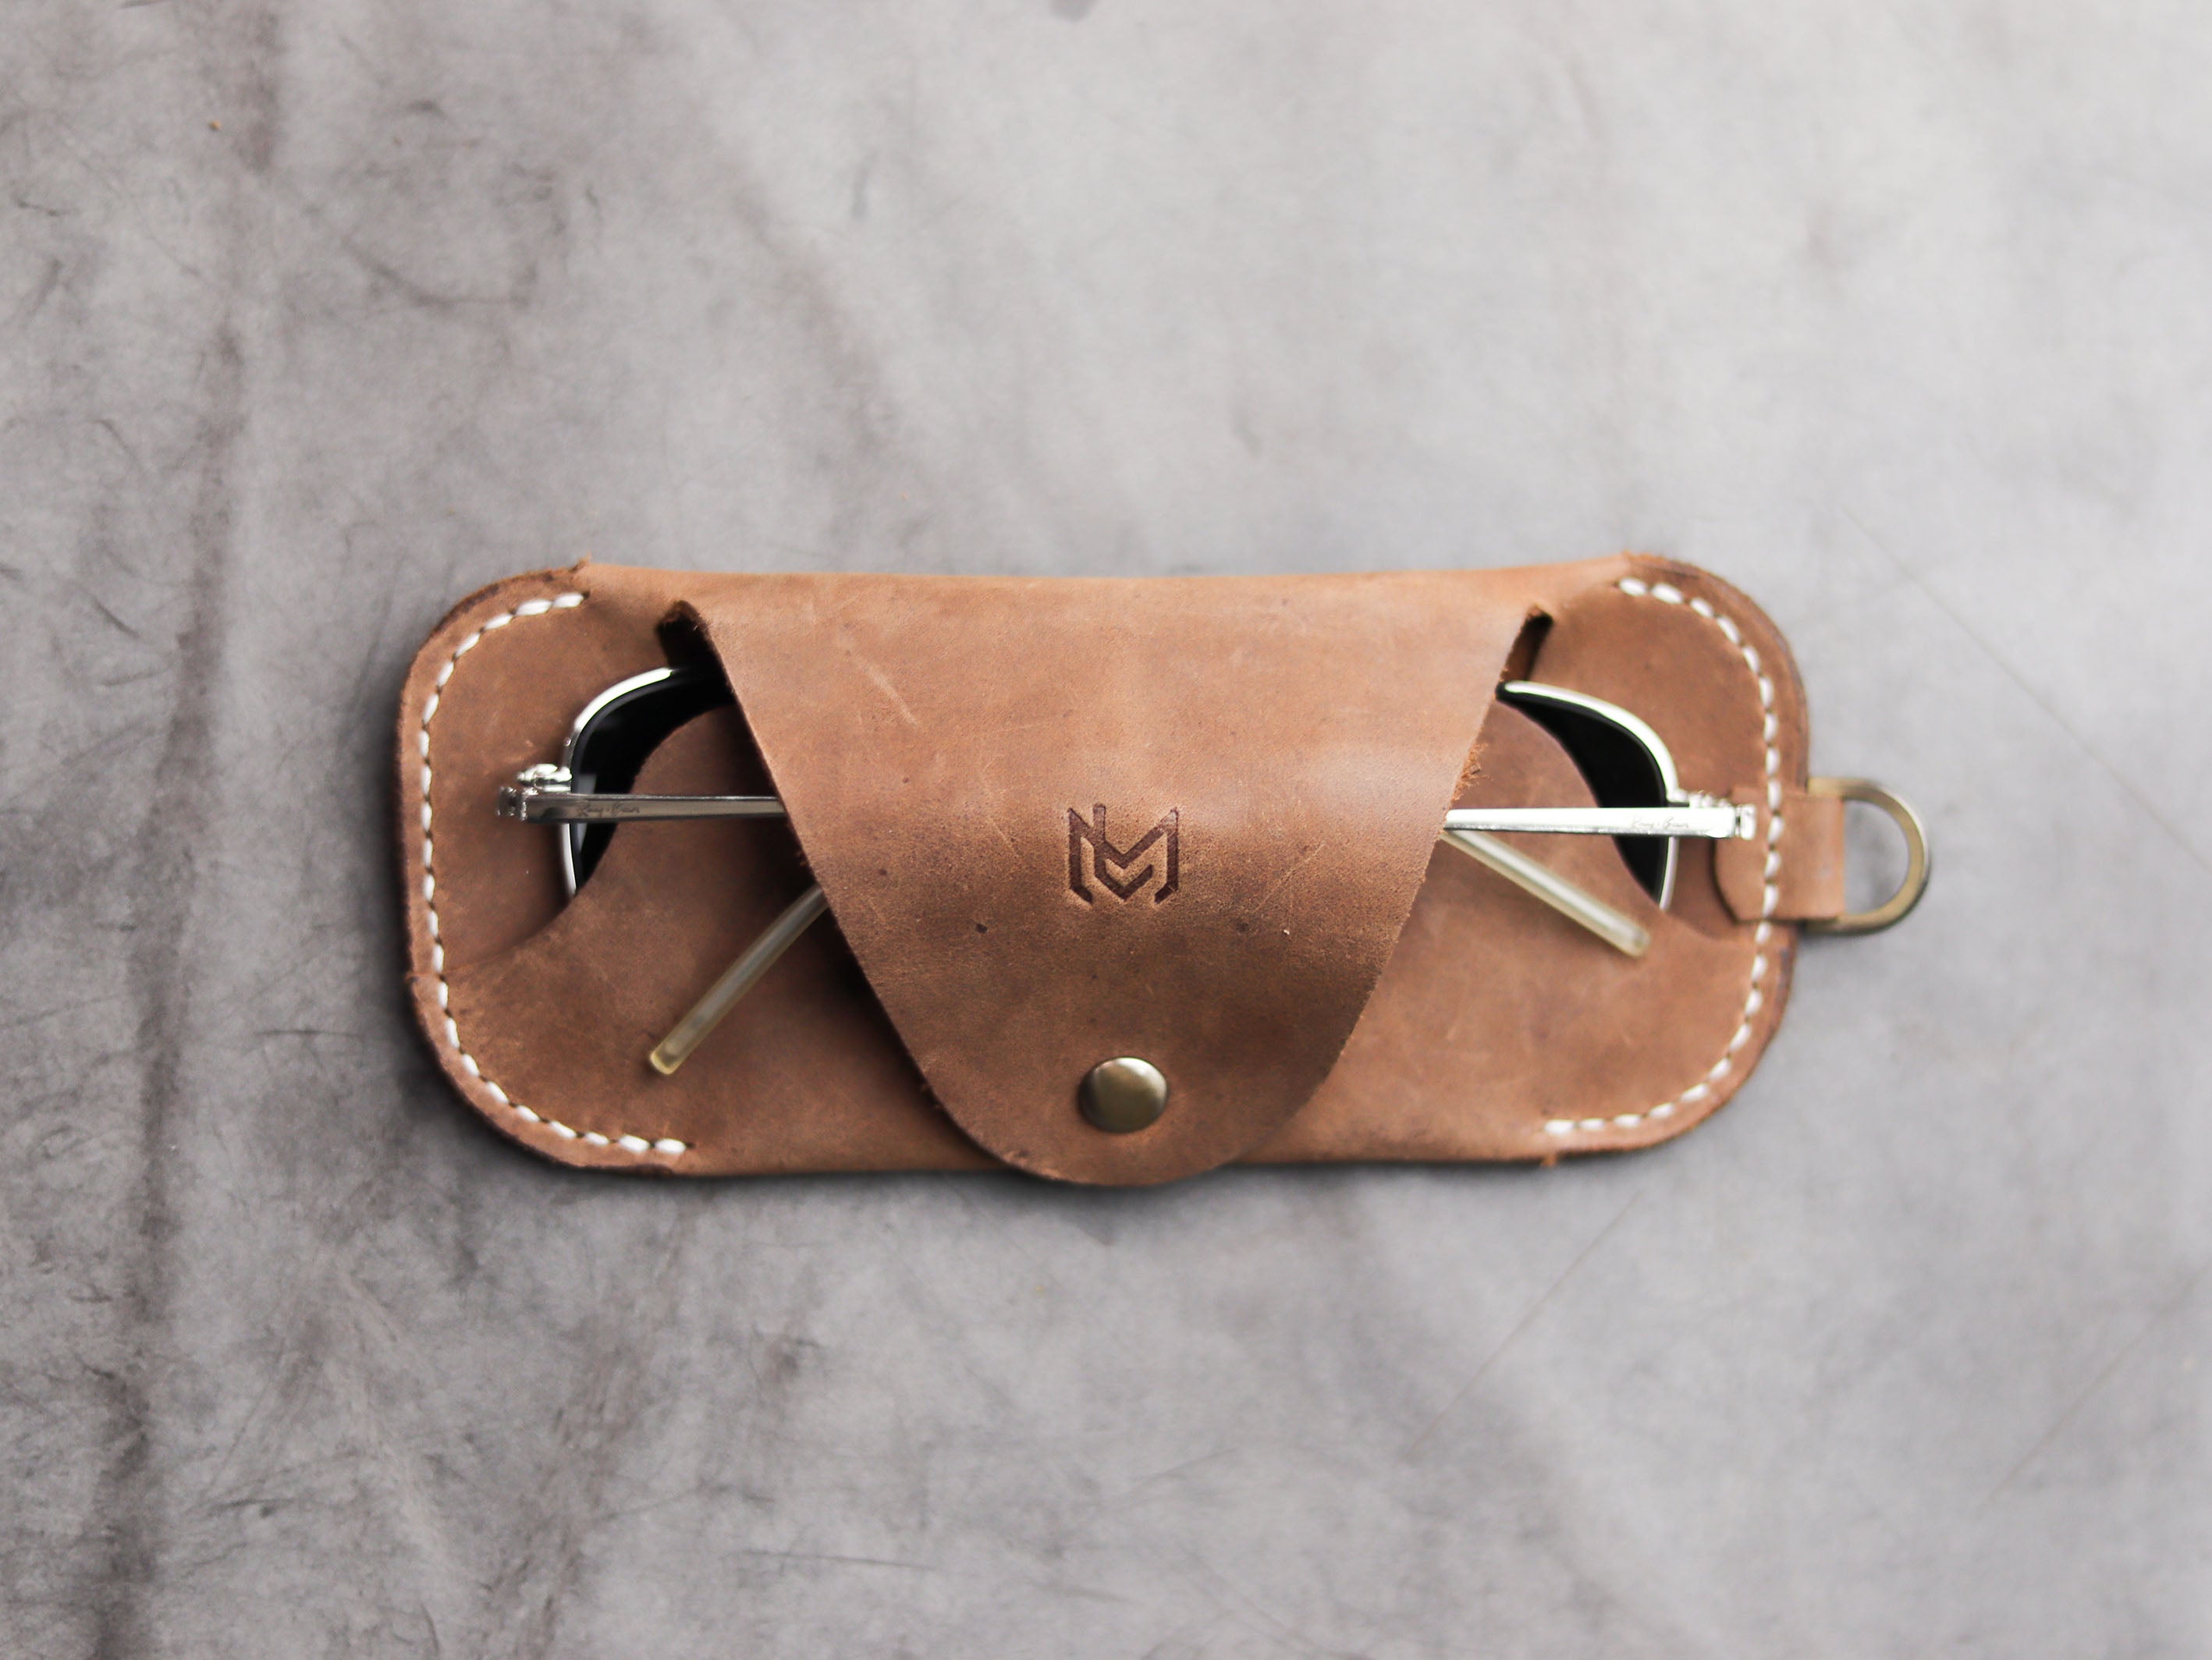 SG-2 SUNGLASSES CASE - RUSTY BROWN LEATHER